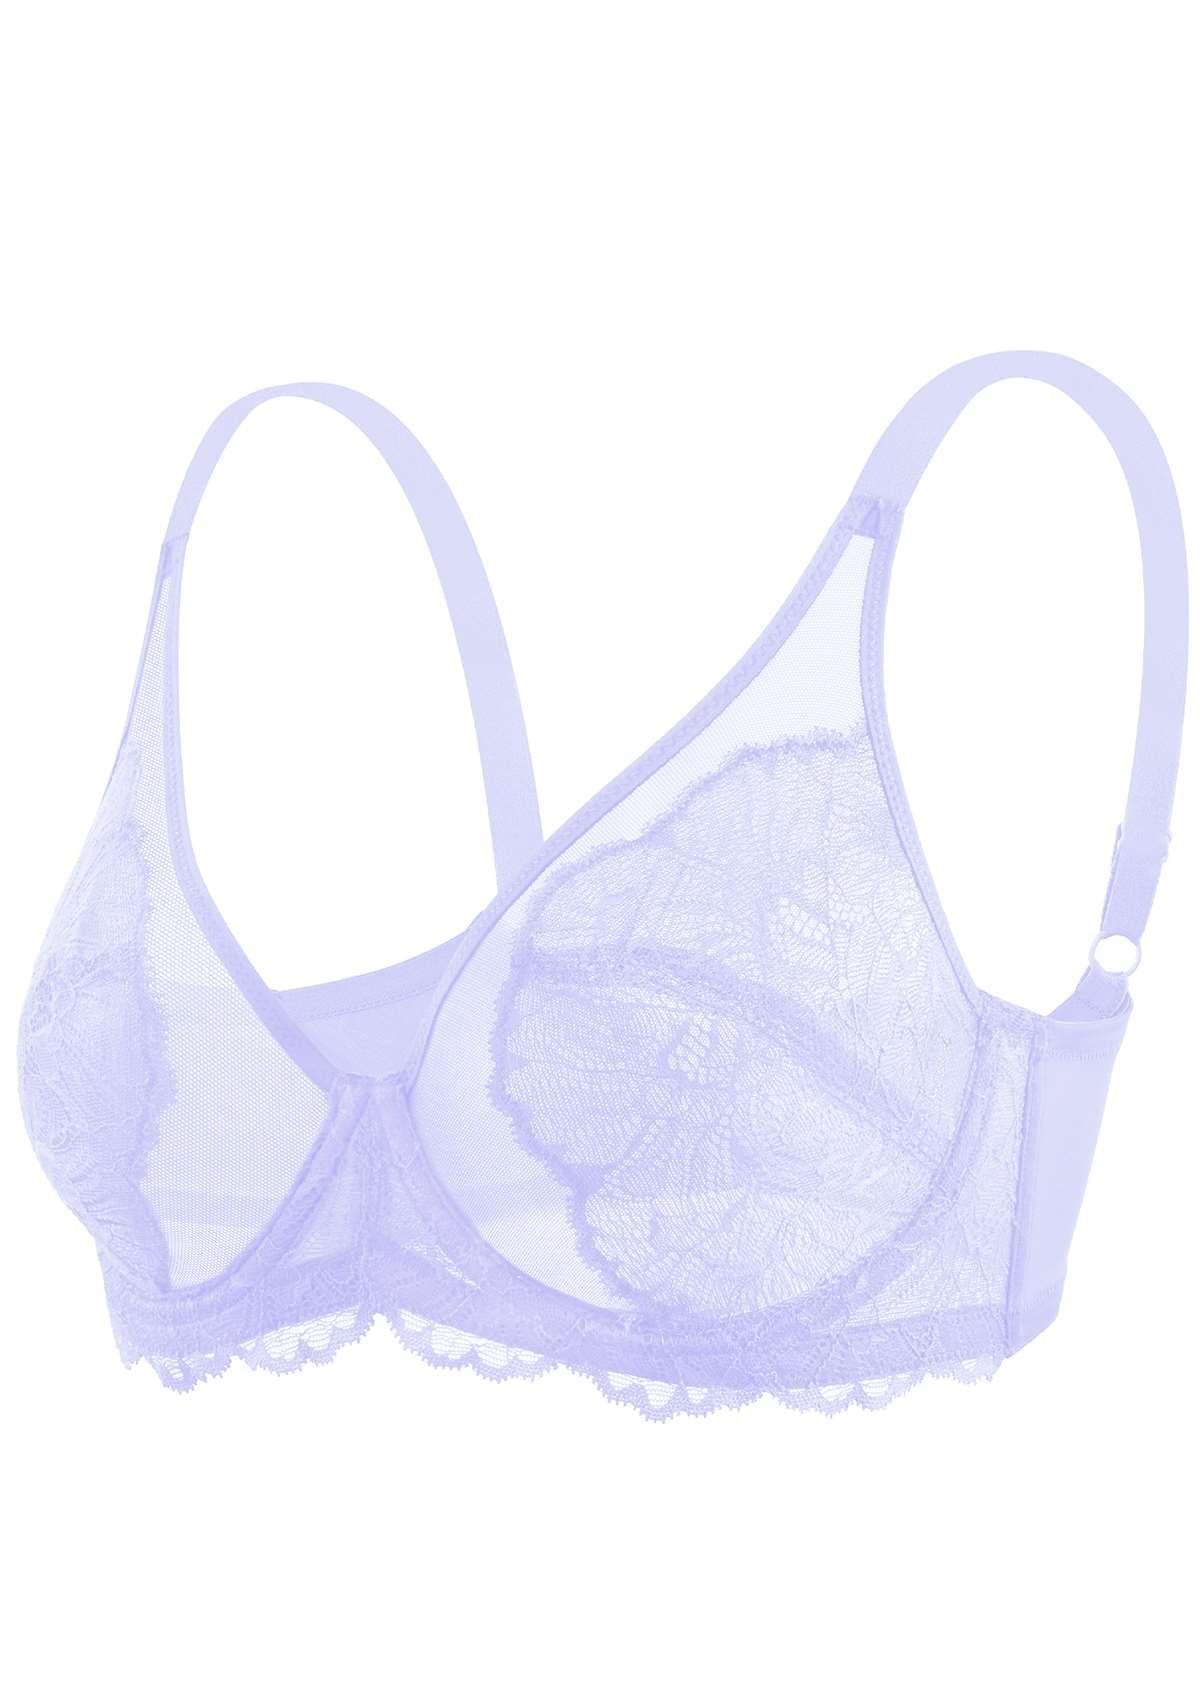 HSIA Blossom Transparent Lace Bra: Plus Size Wired Back Smoothing Bra - Light Purple / 34 / DDD/F